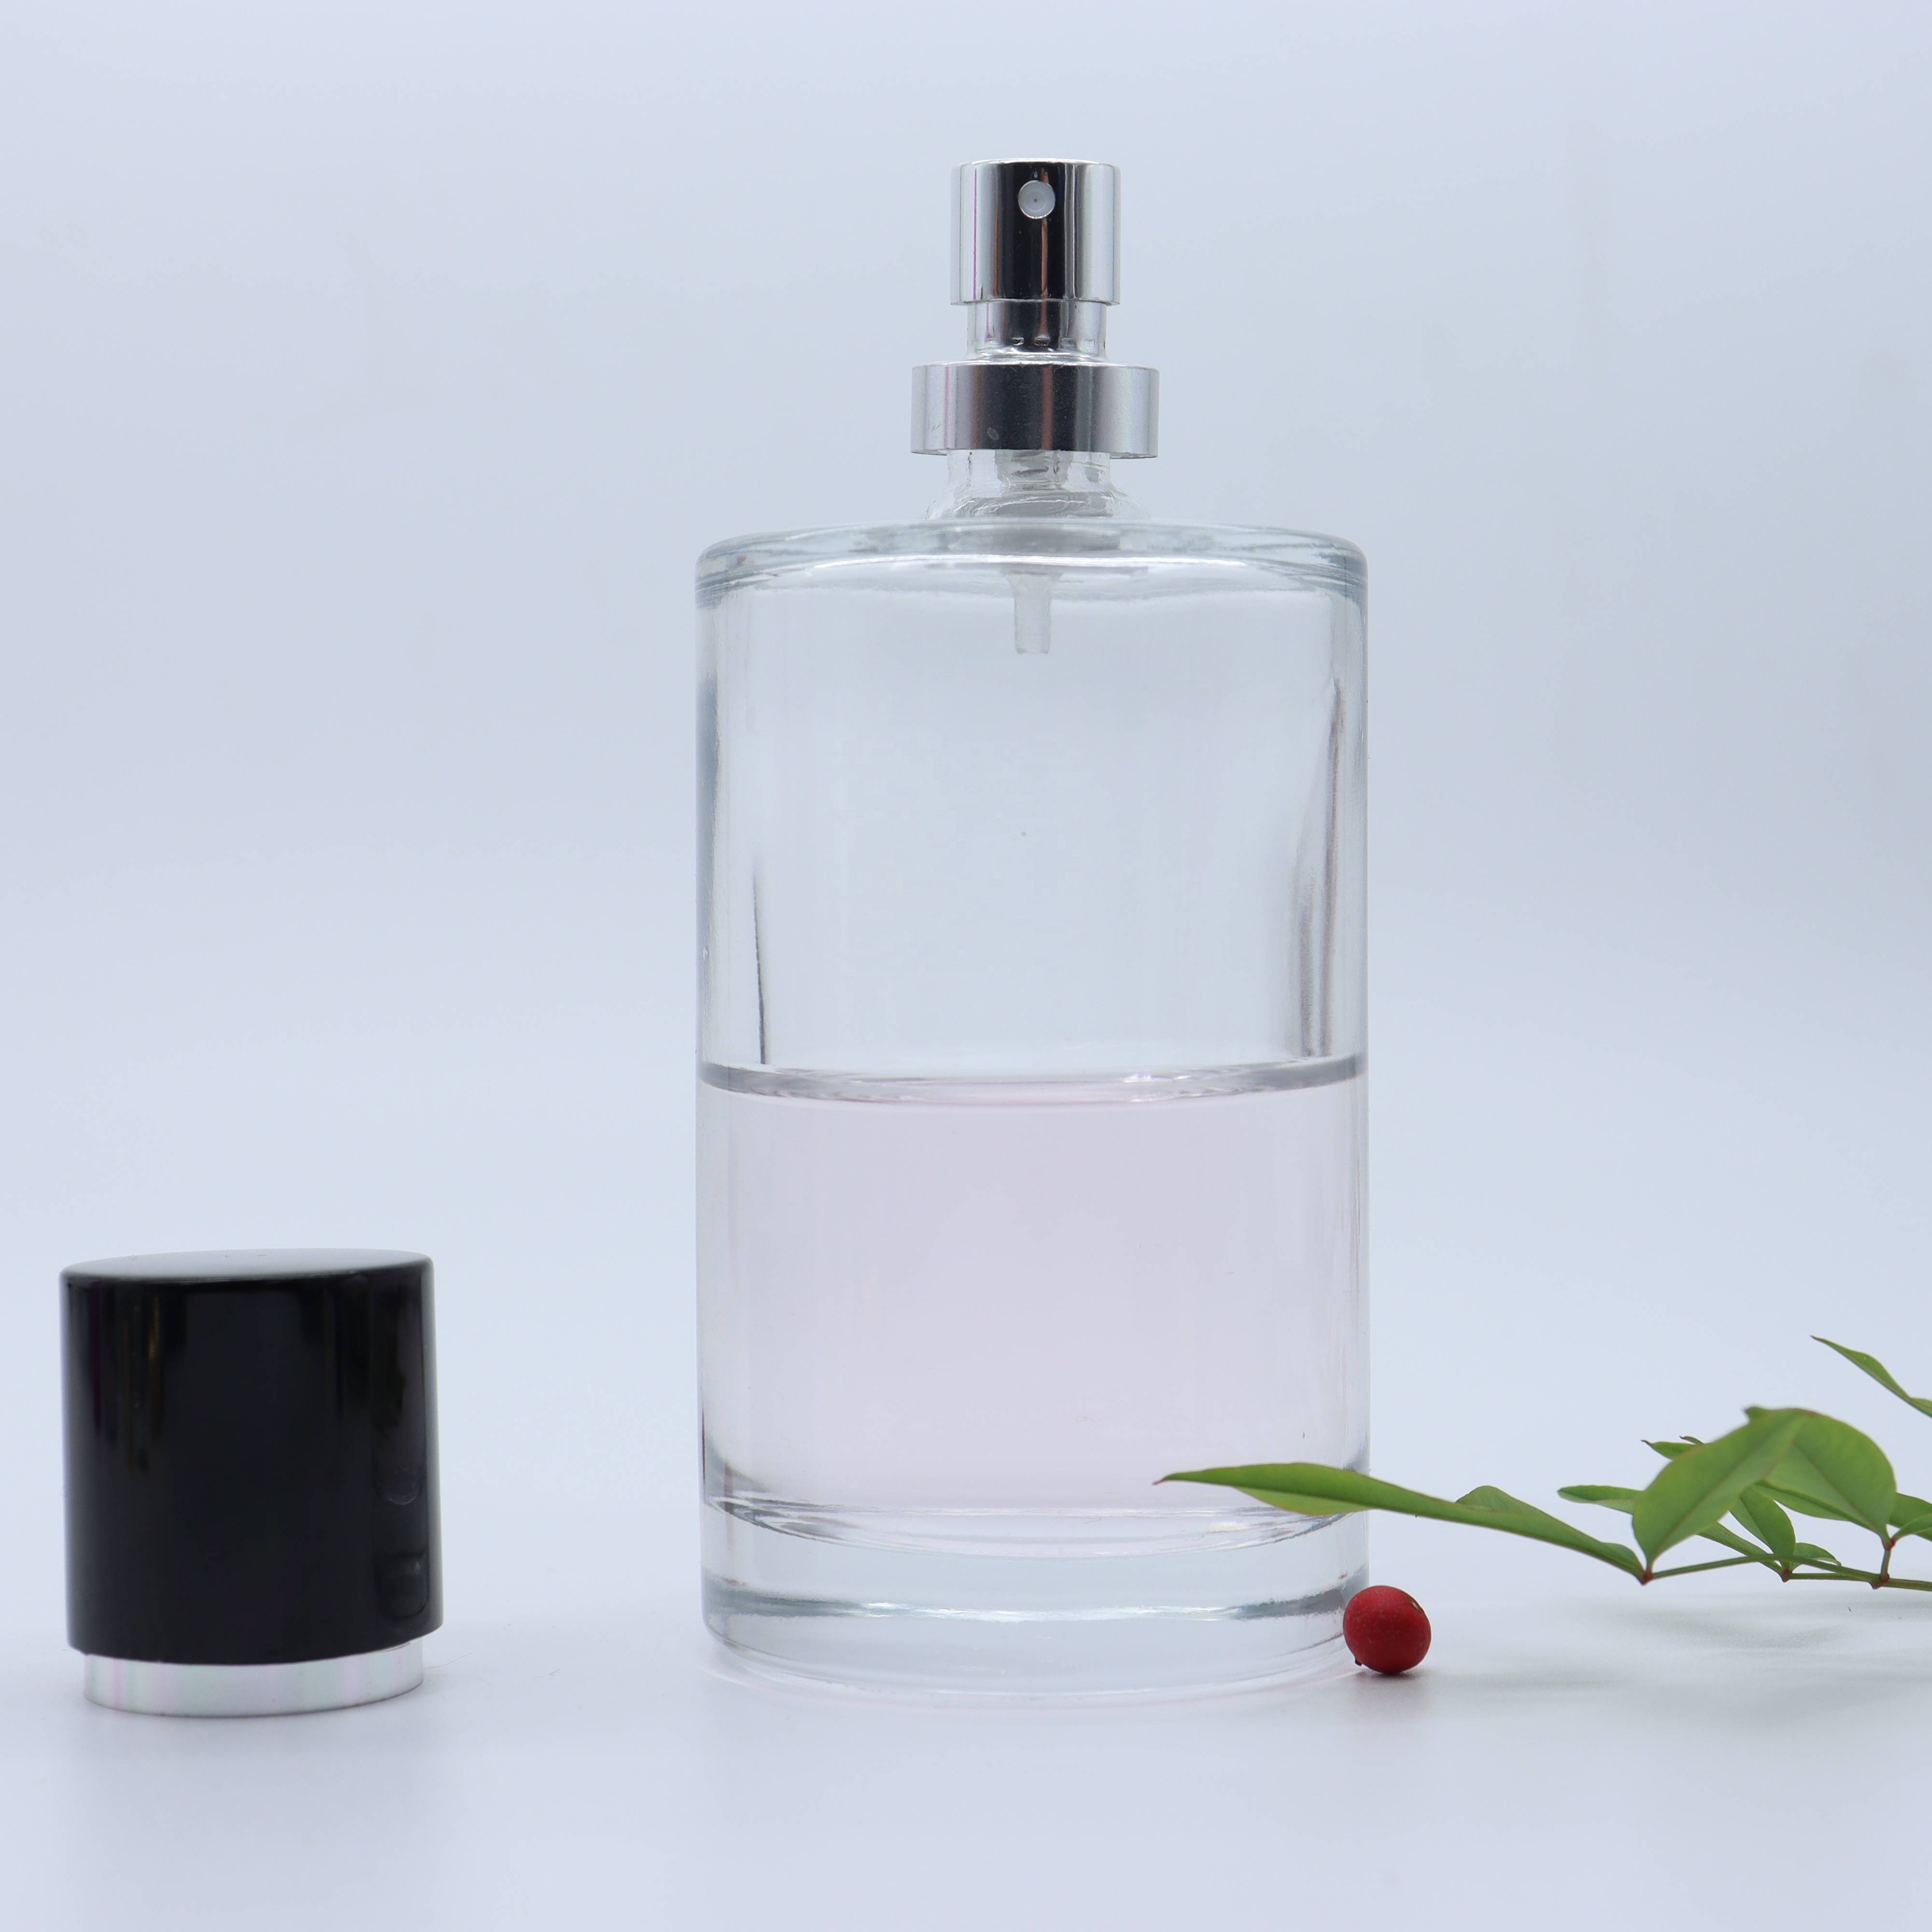 110 ml Refillable Perfume Spray Bottle Home Fragrance Reed Diffuser with Mist Sprayer